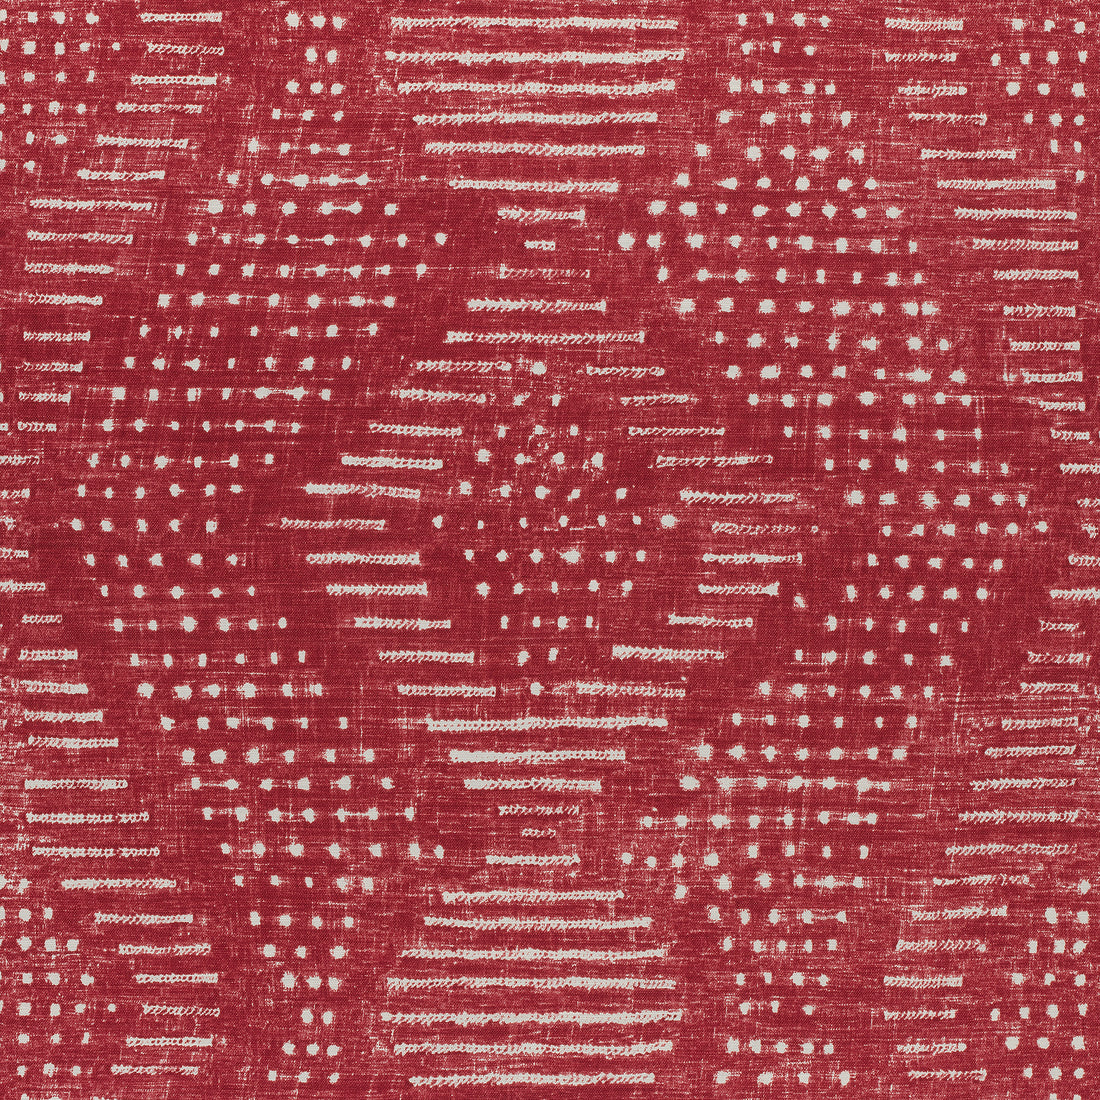 Mali fabric in red color - pattern number AF78715 - by Anna French in the Palampore collection